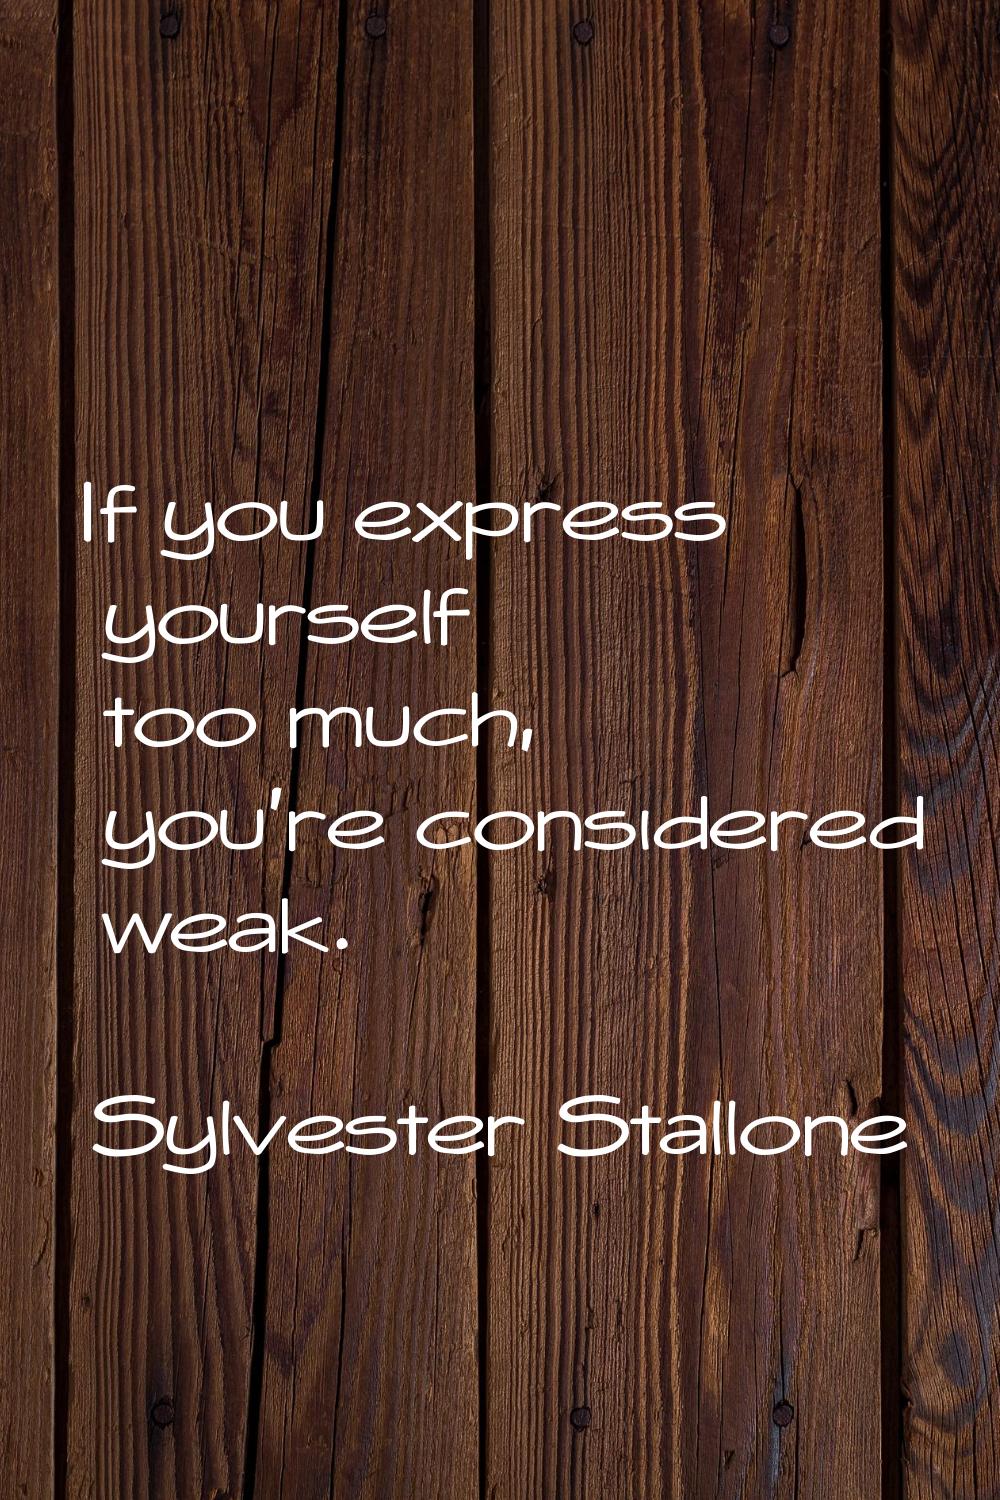 If you express yourself too much, you're considered weak.